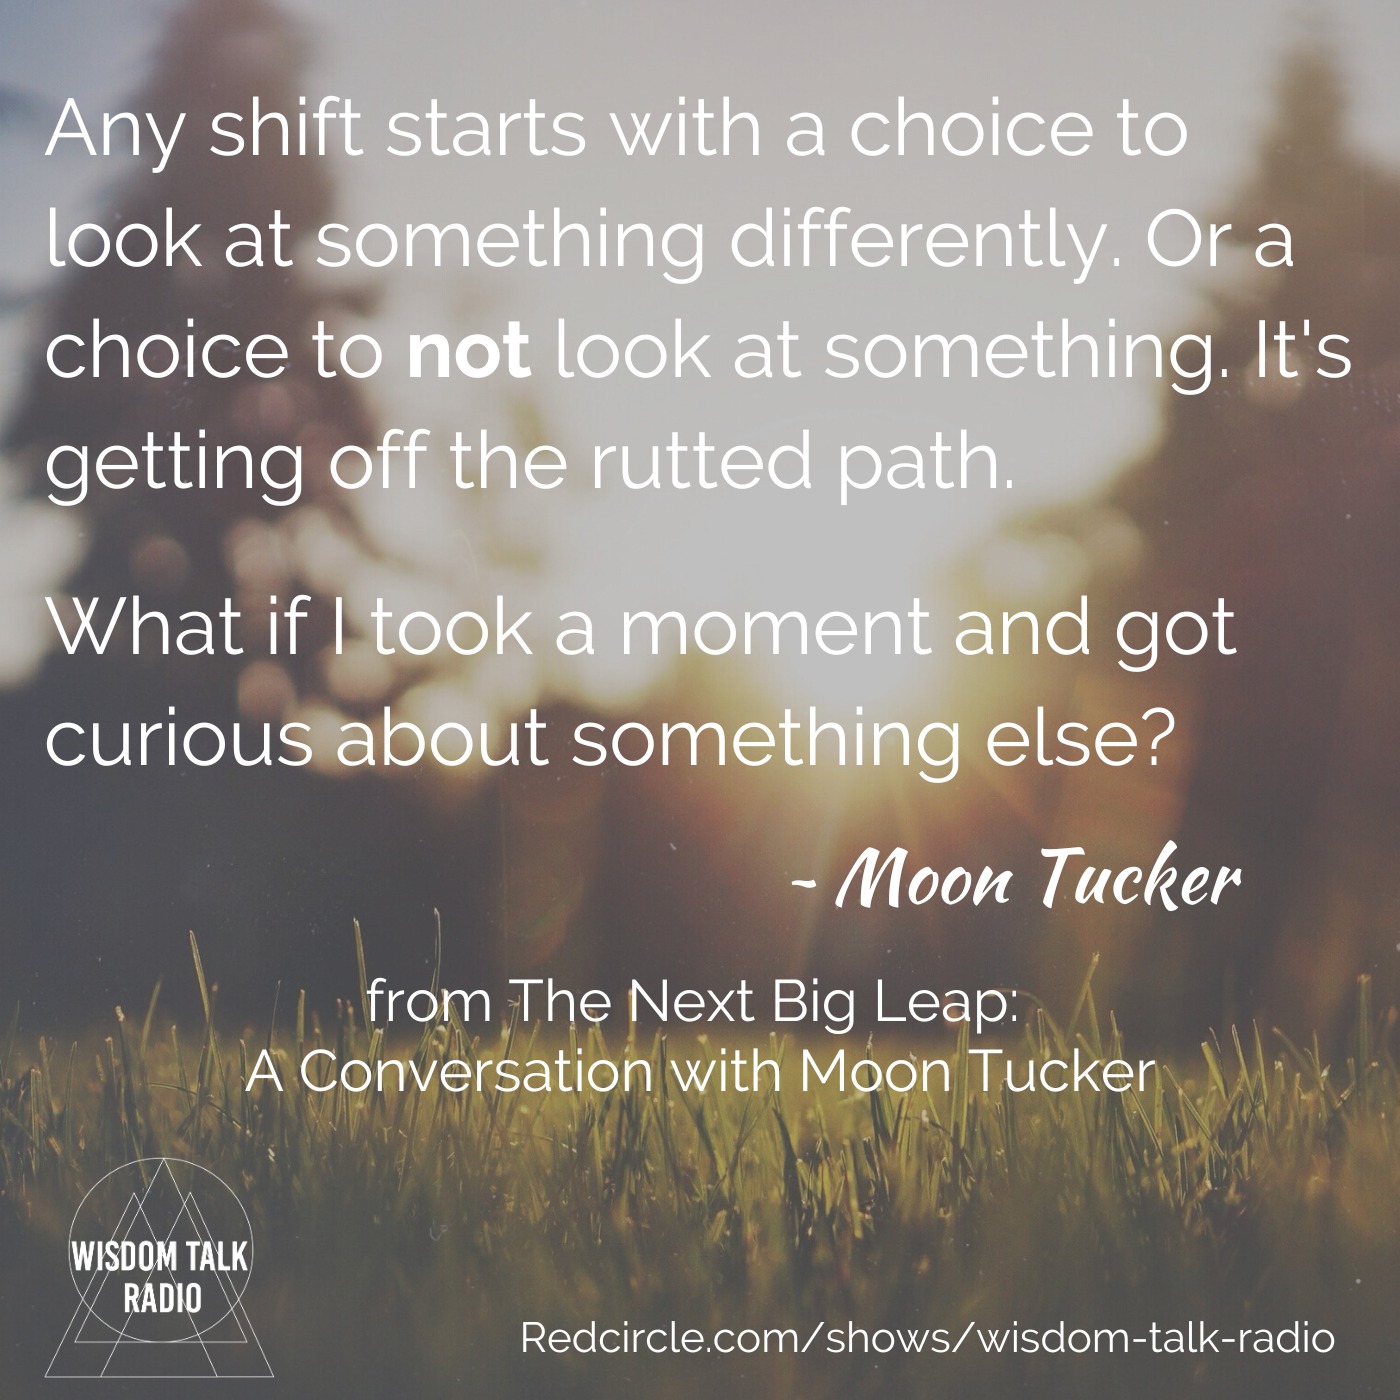 The Next Big Leap: a Conversation with Moon Tucker